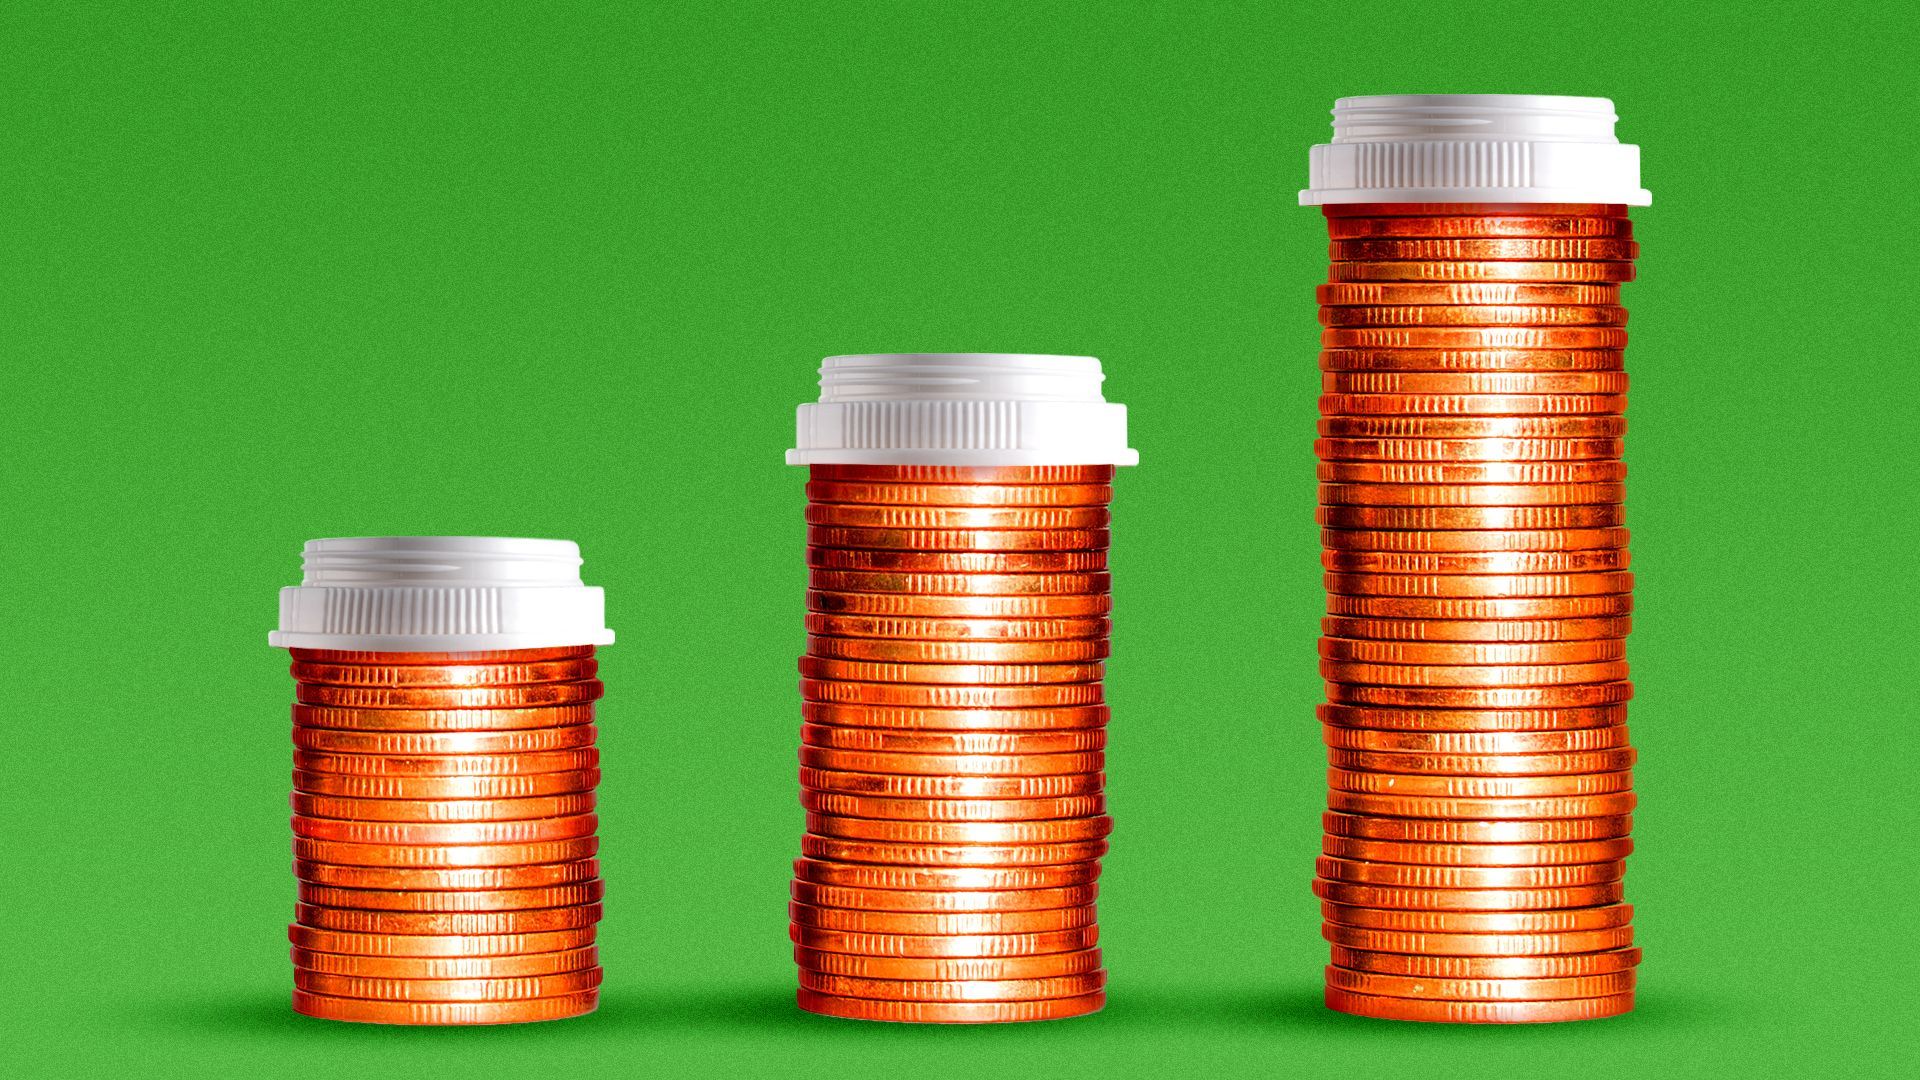 Illustration of three prescription pill bottles made from stacks of coins, organized by ascending height.